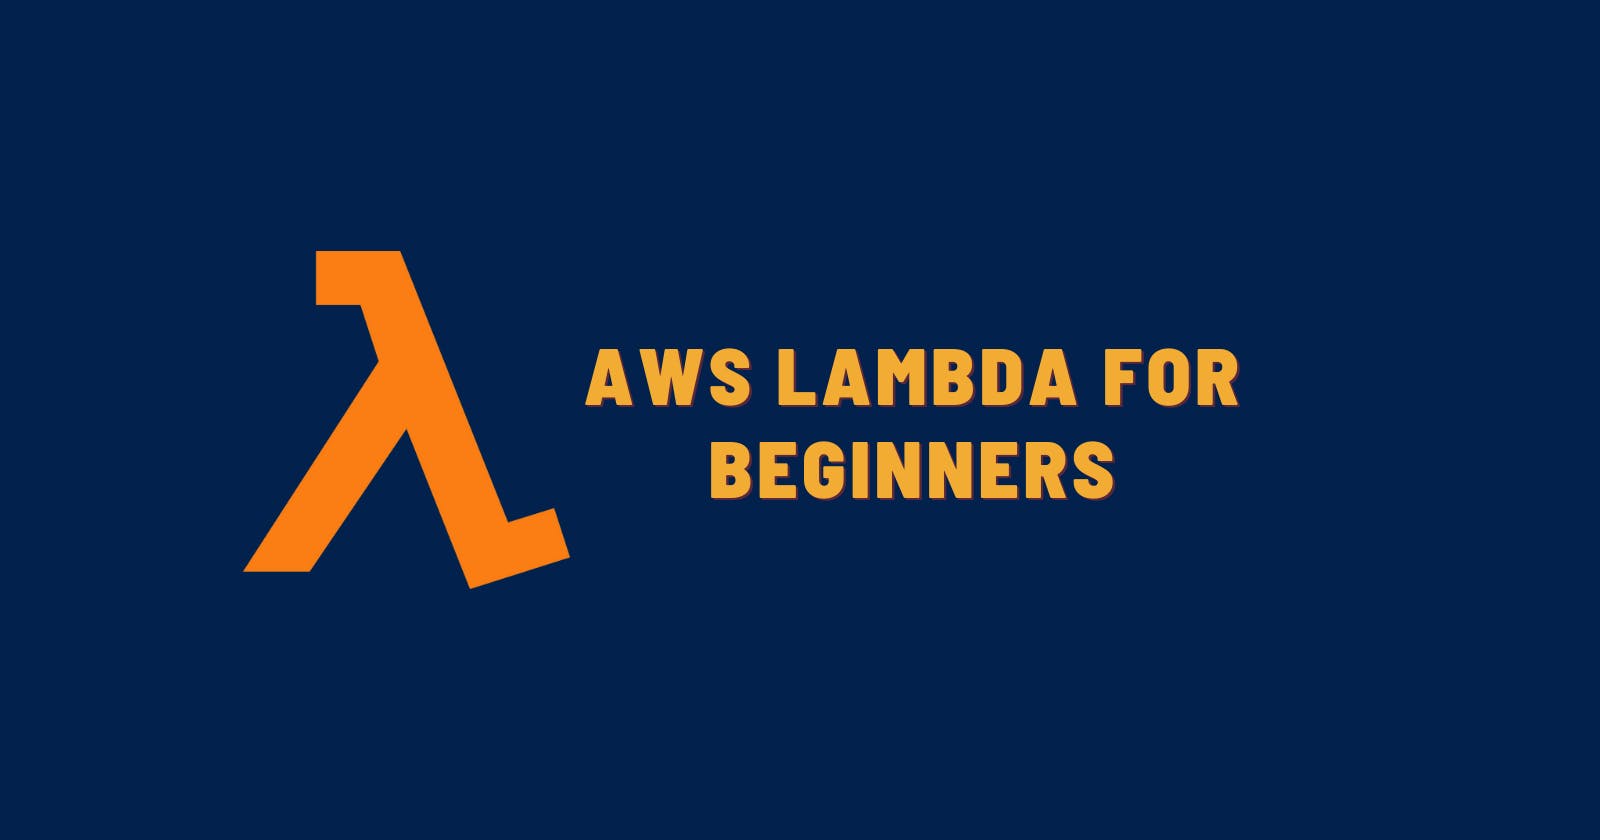 A visual guide to AWS Lambda for beginners